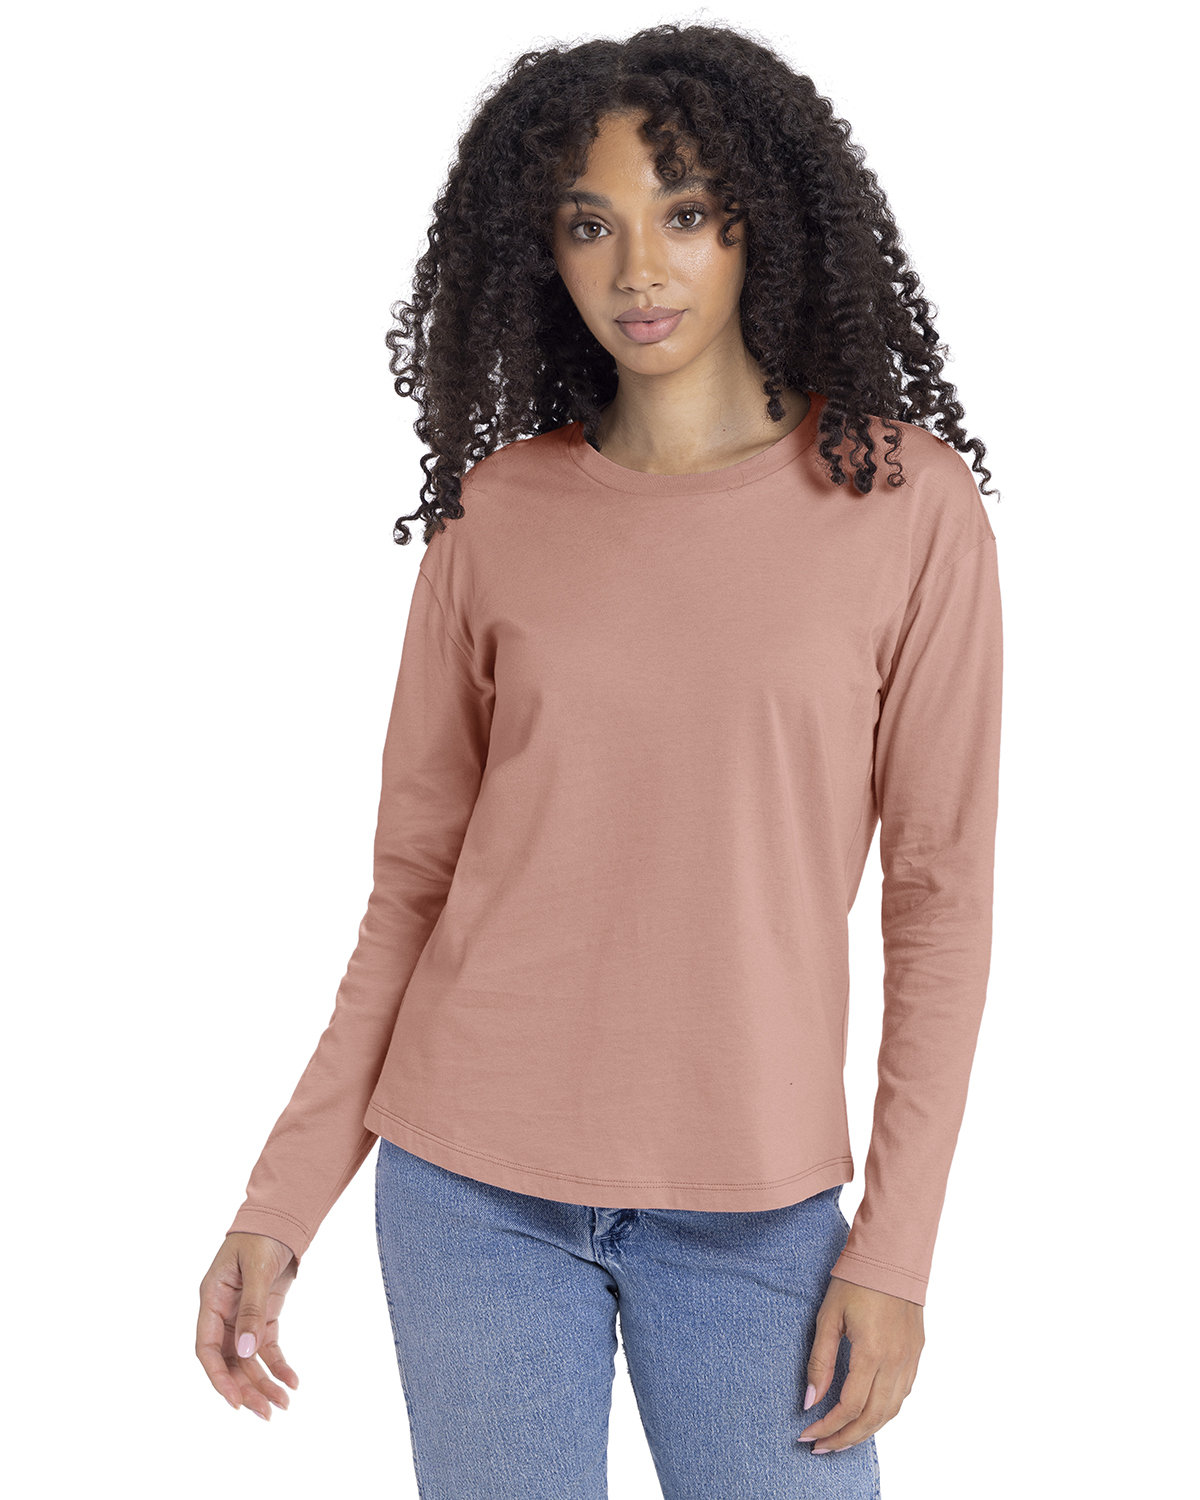 Next Level Apparel 3911 - Ladies' Relaxed Long Sleeve T-Shirt